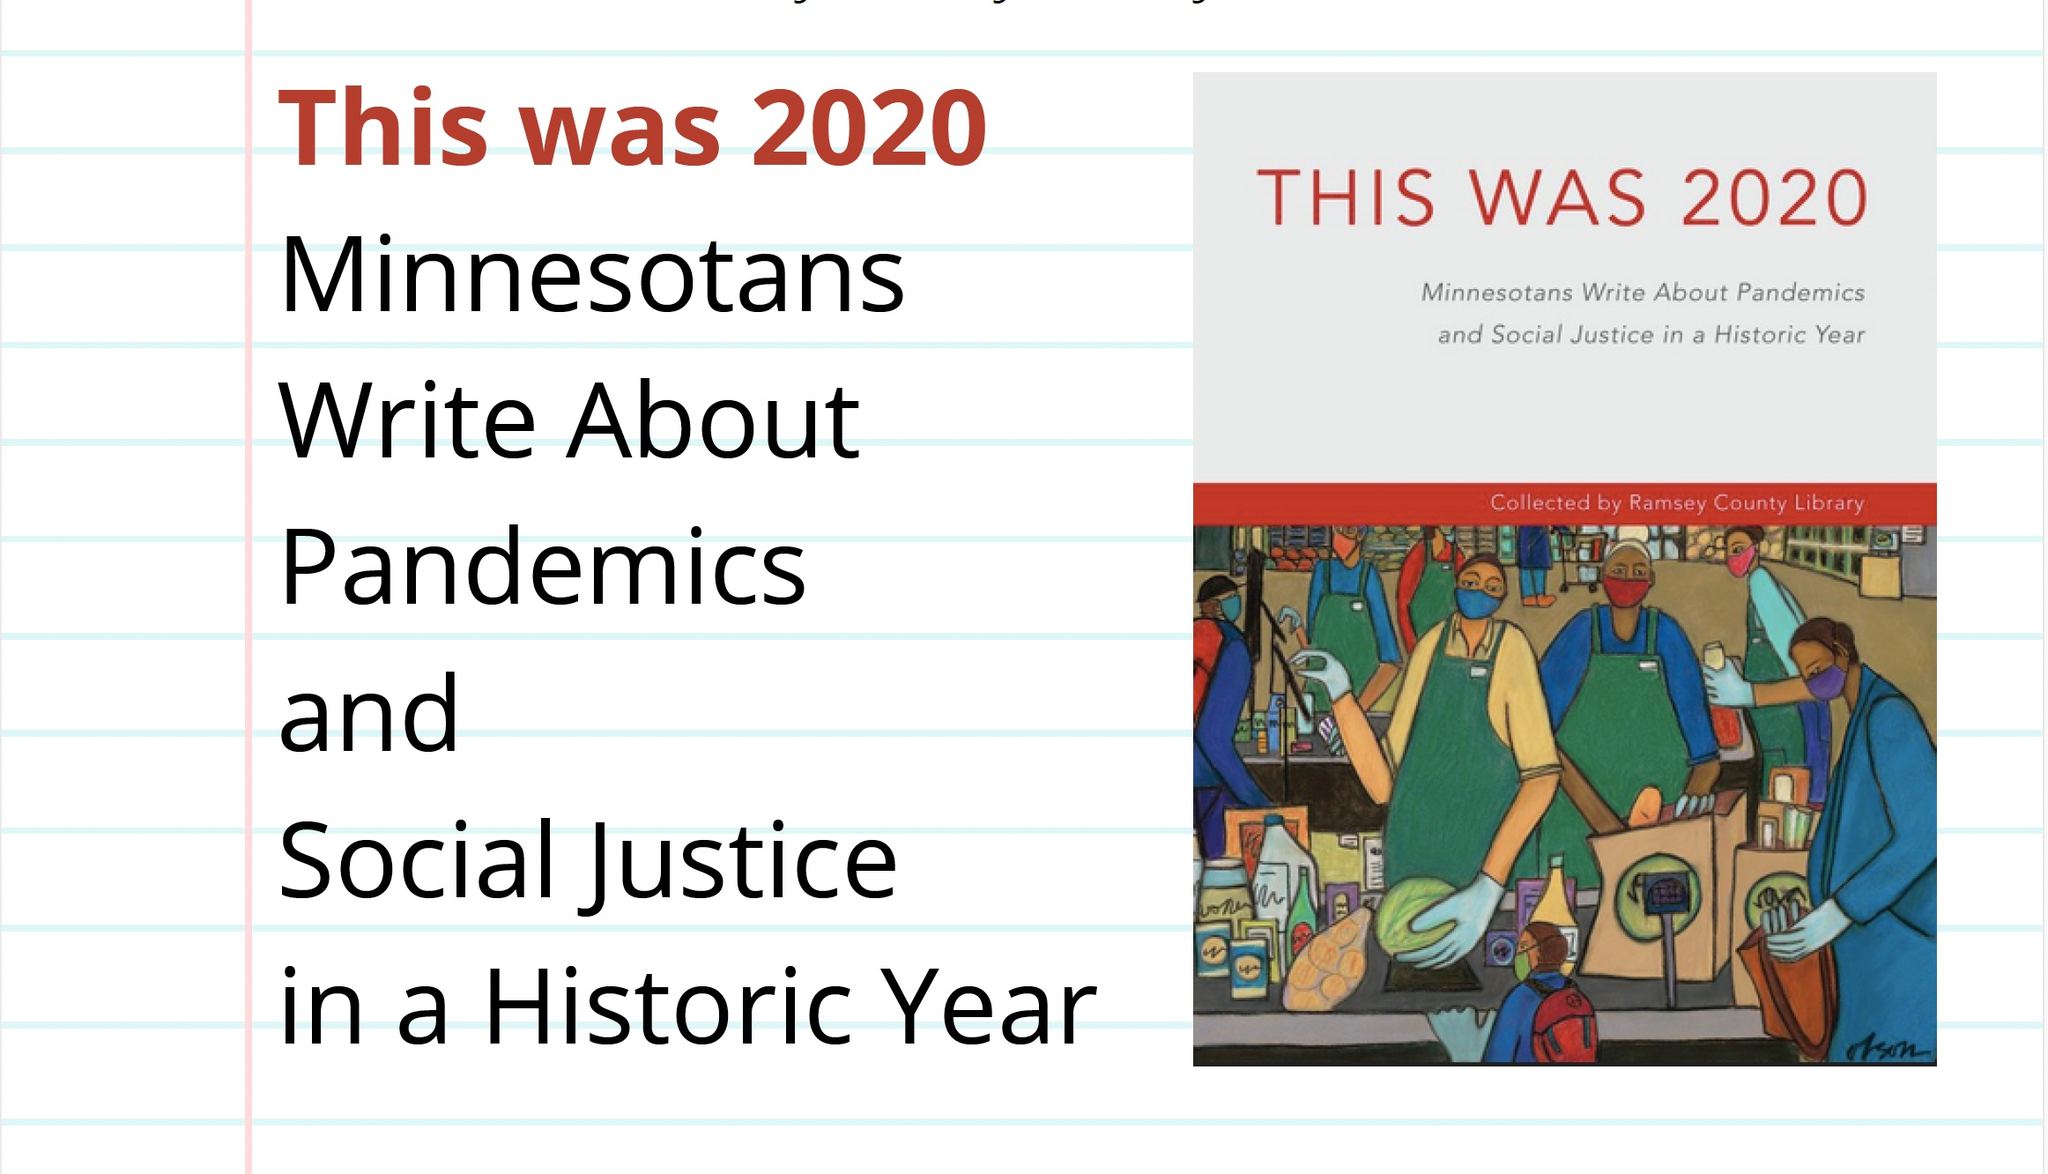 Event Promo Photo For This was 2020: Minnesotans Write About Pandemics and Social Justice in a Historic Year